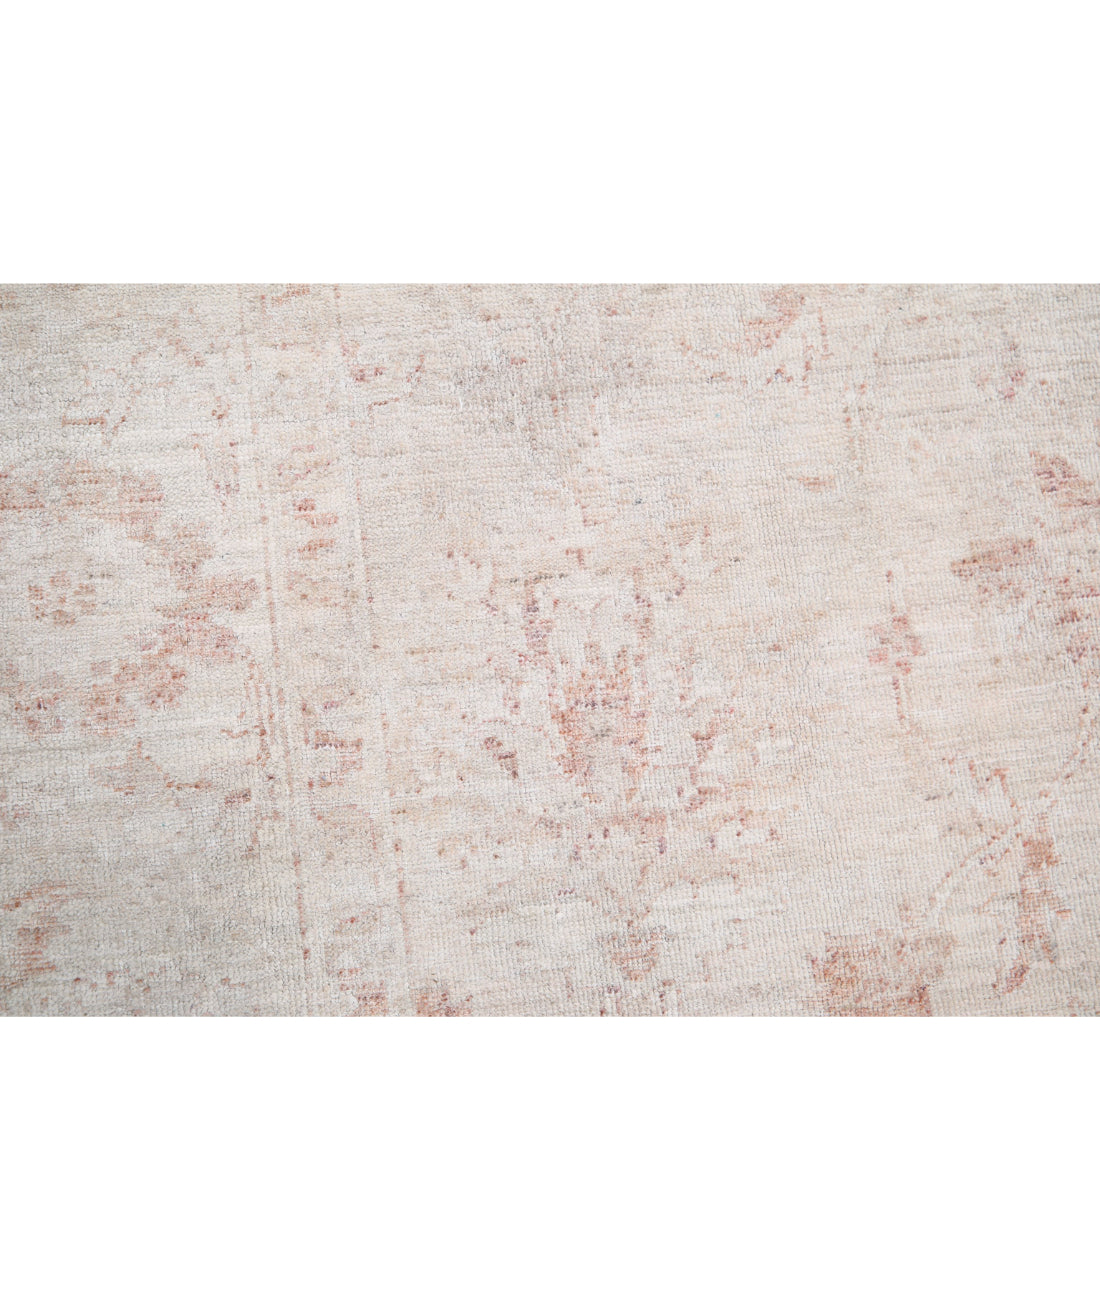 Hand Knotted Serenity Wool Rug - 6'4'' x 7'11'' 6'4'' x 7'11'' (190 X 238) / Ivory / Ivory